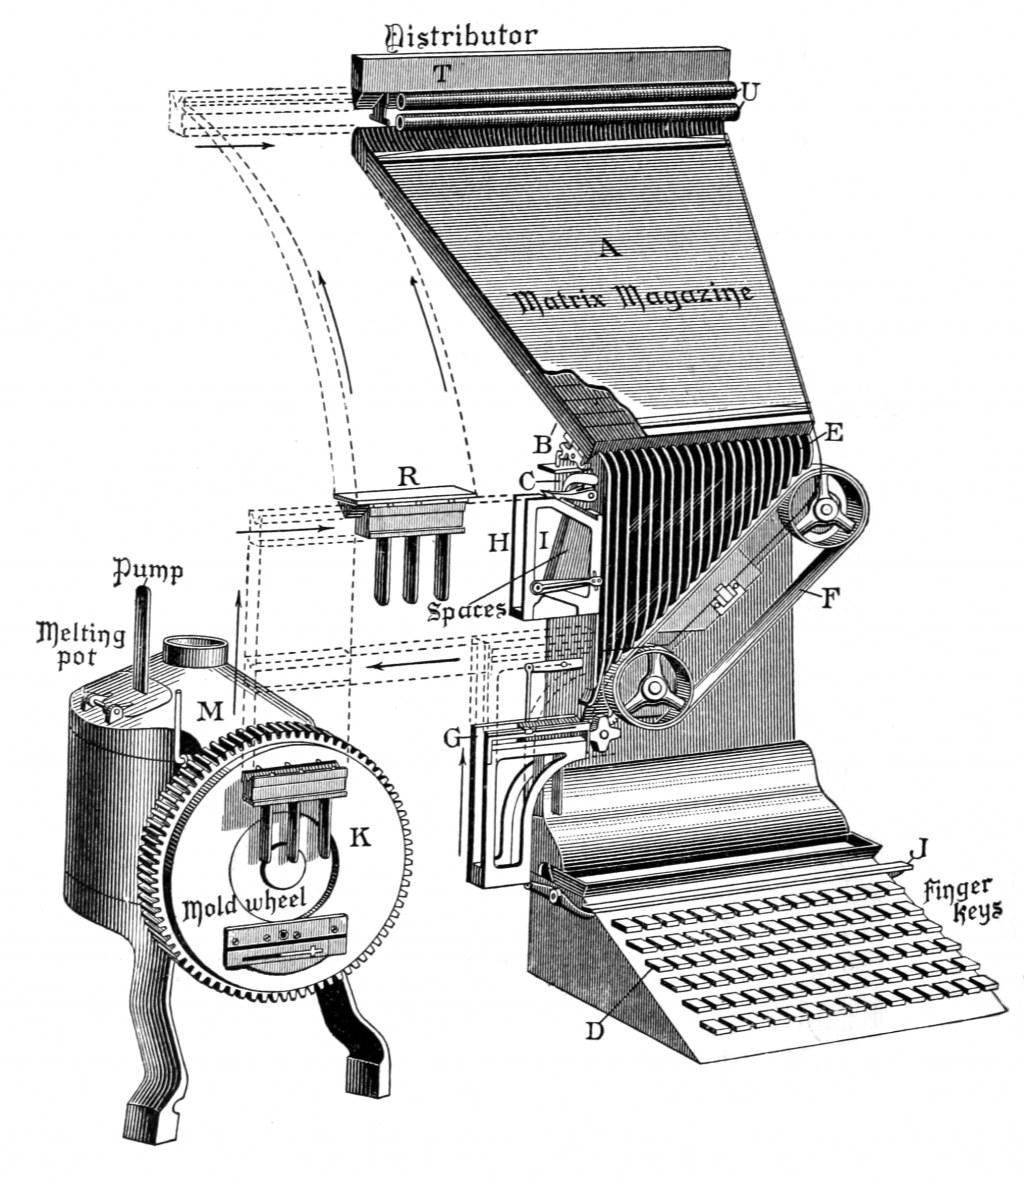 Schematic of Linotype operation. From De Vinne, The Practice of Typography: Modern Methods of Book Composition (1904) p. 406.